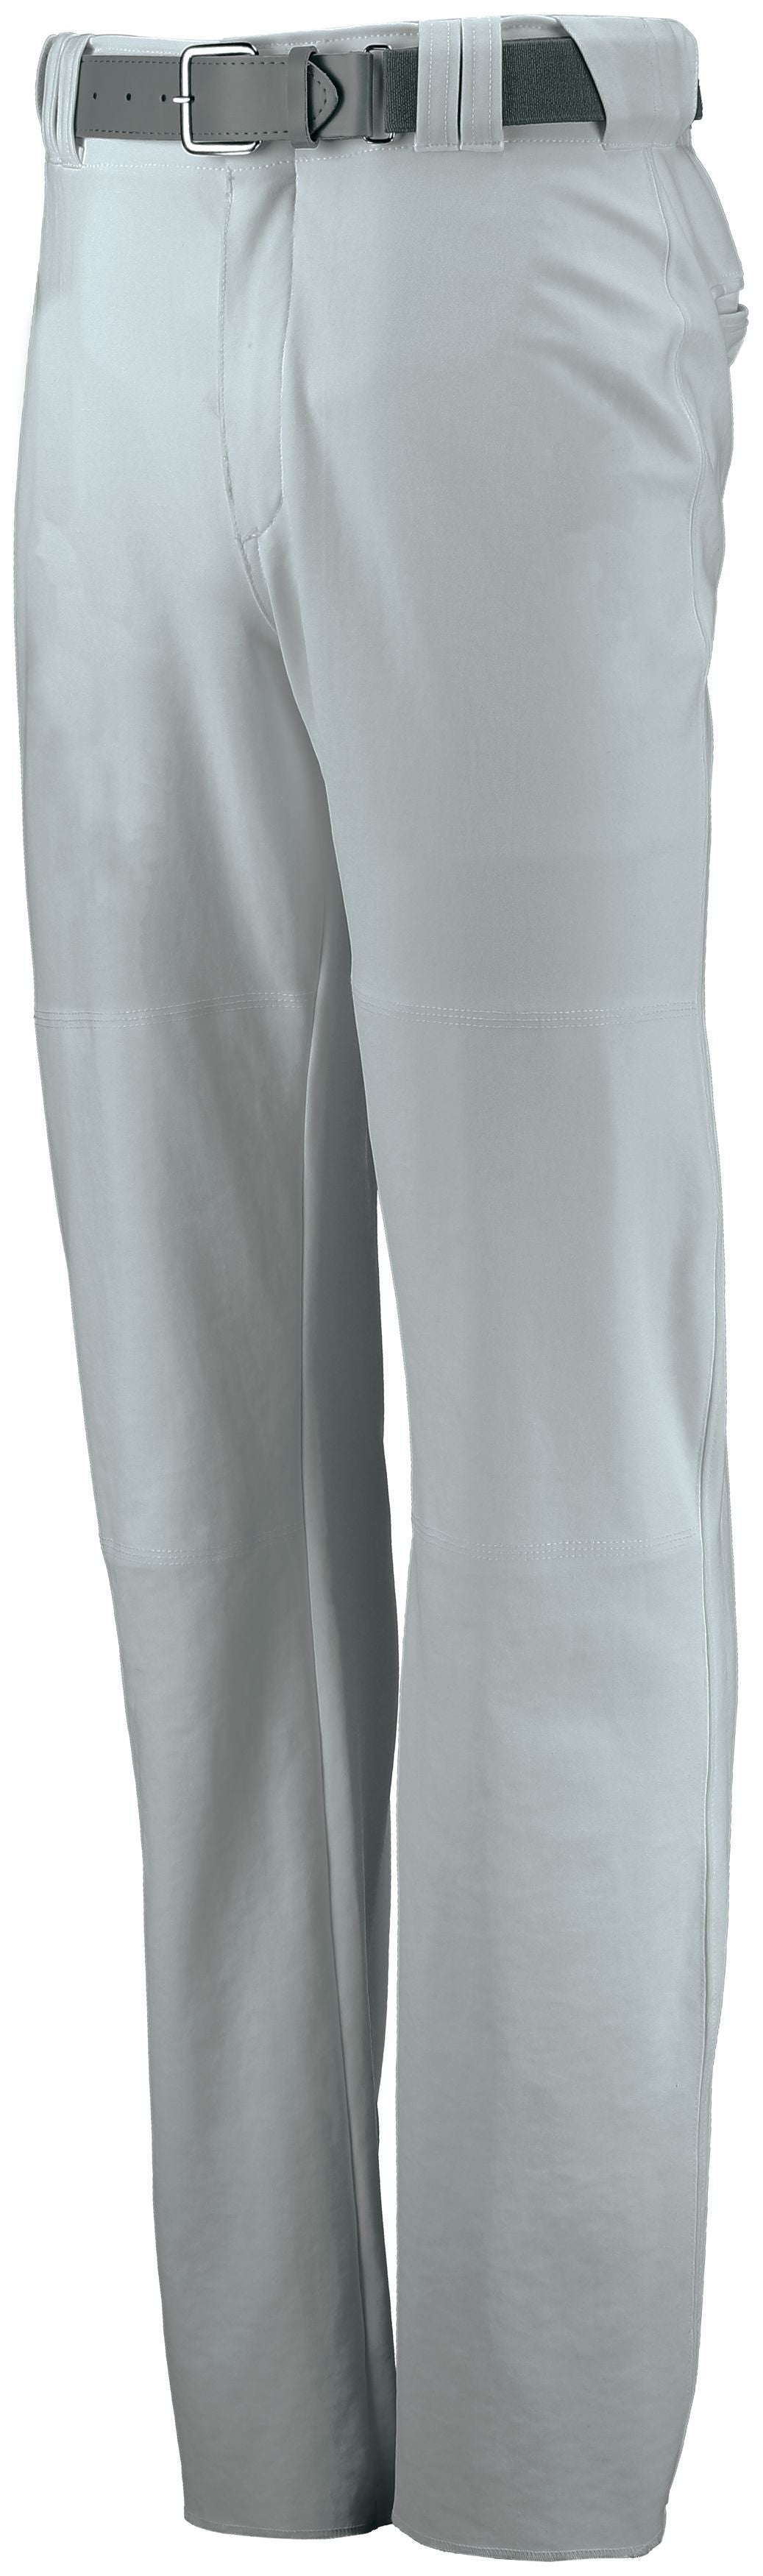 Deluxe Relaxed Fit  Baseball Pant - 33347M